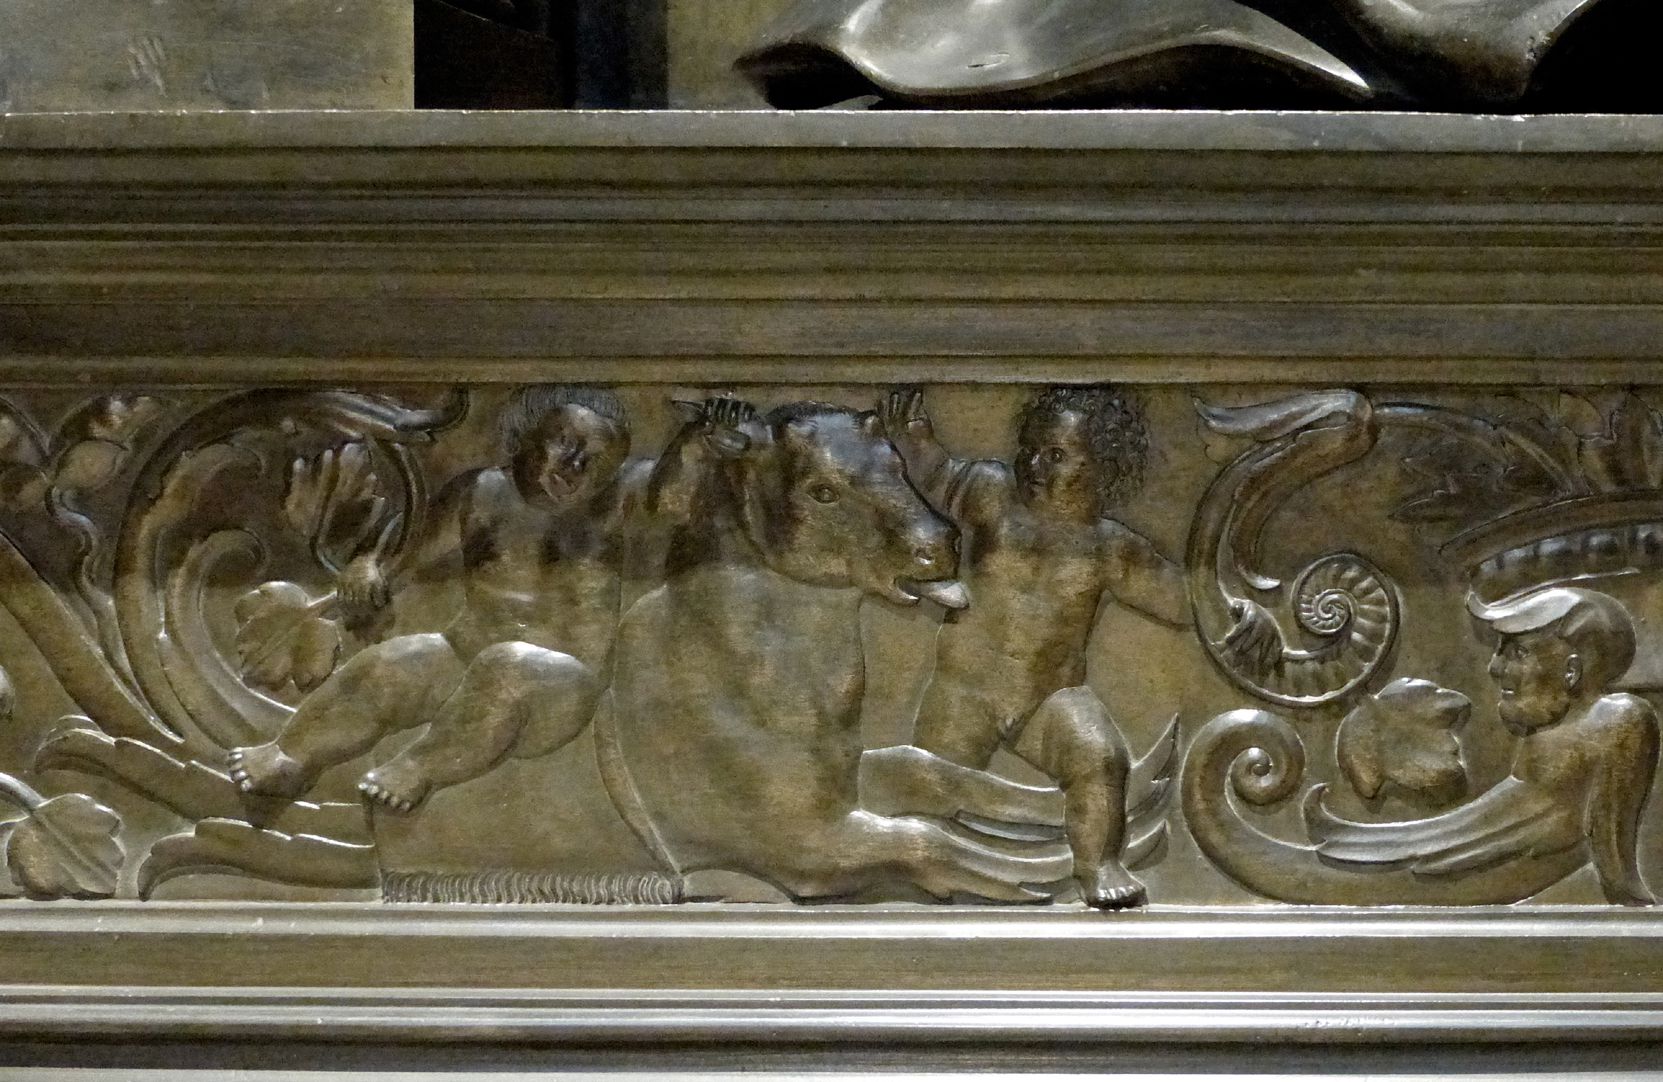 Tomb of Frederick the Wise (Wittenberg) Tomb slab, basis: with taurus/mythical creatures, playing putti, right